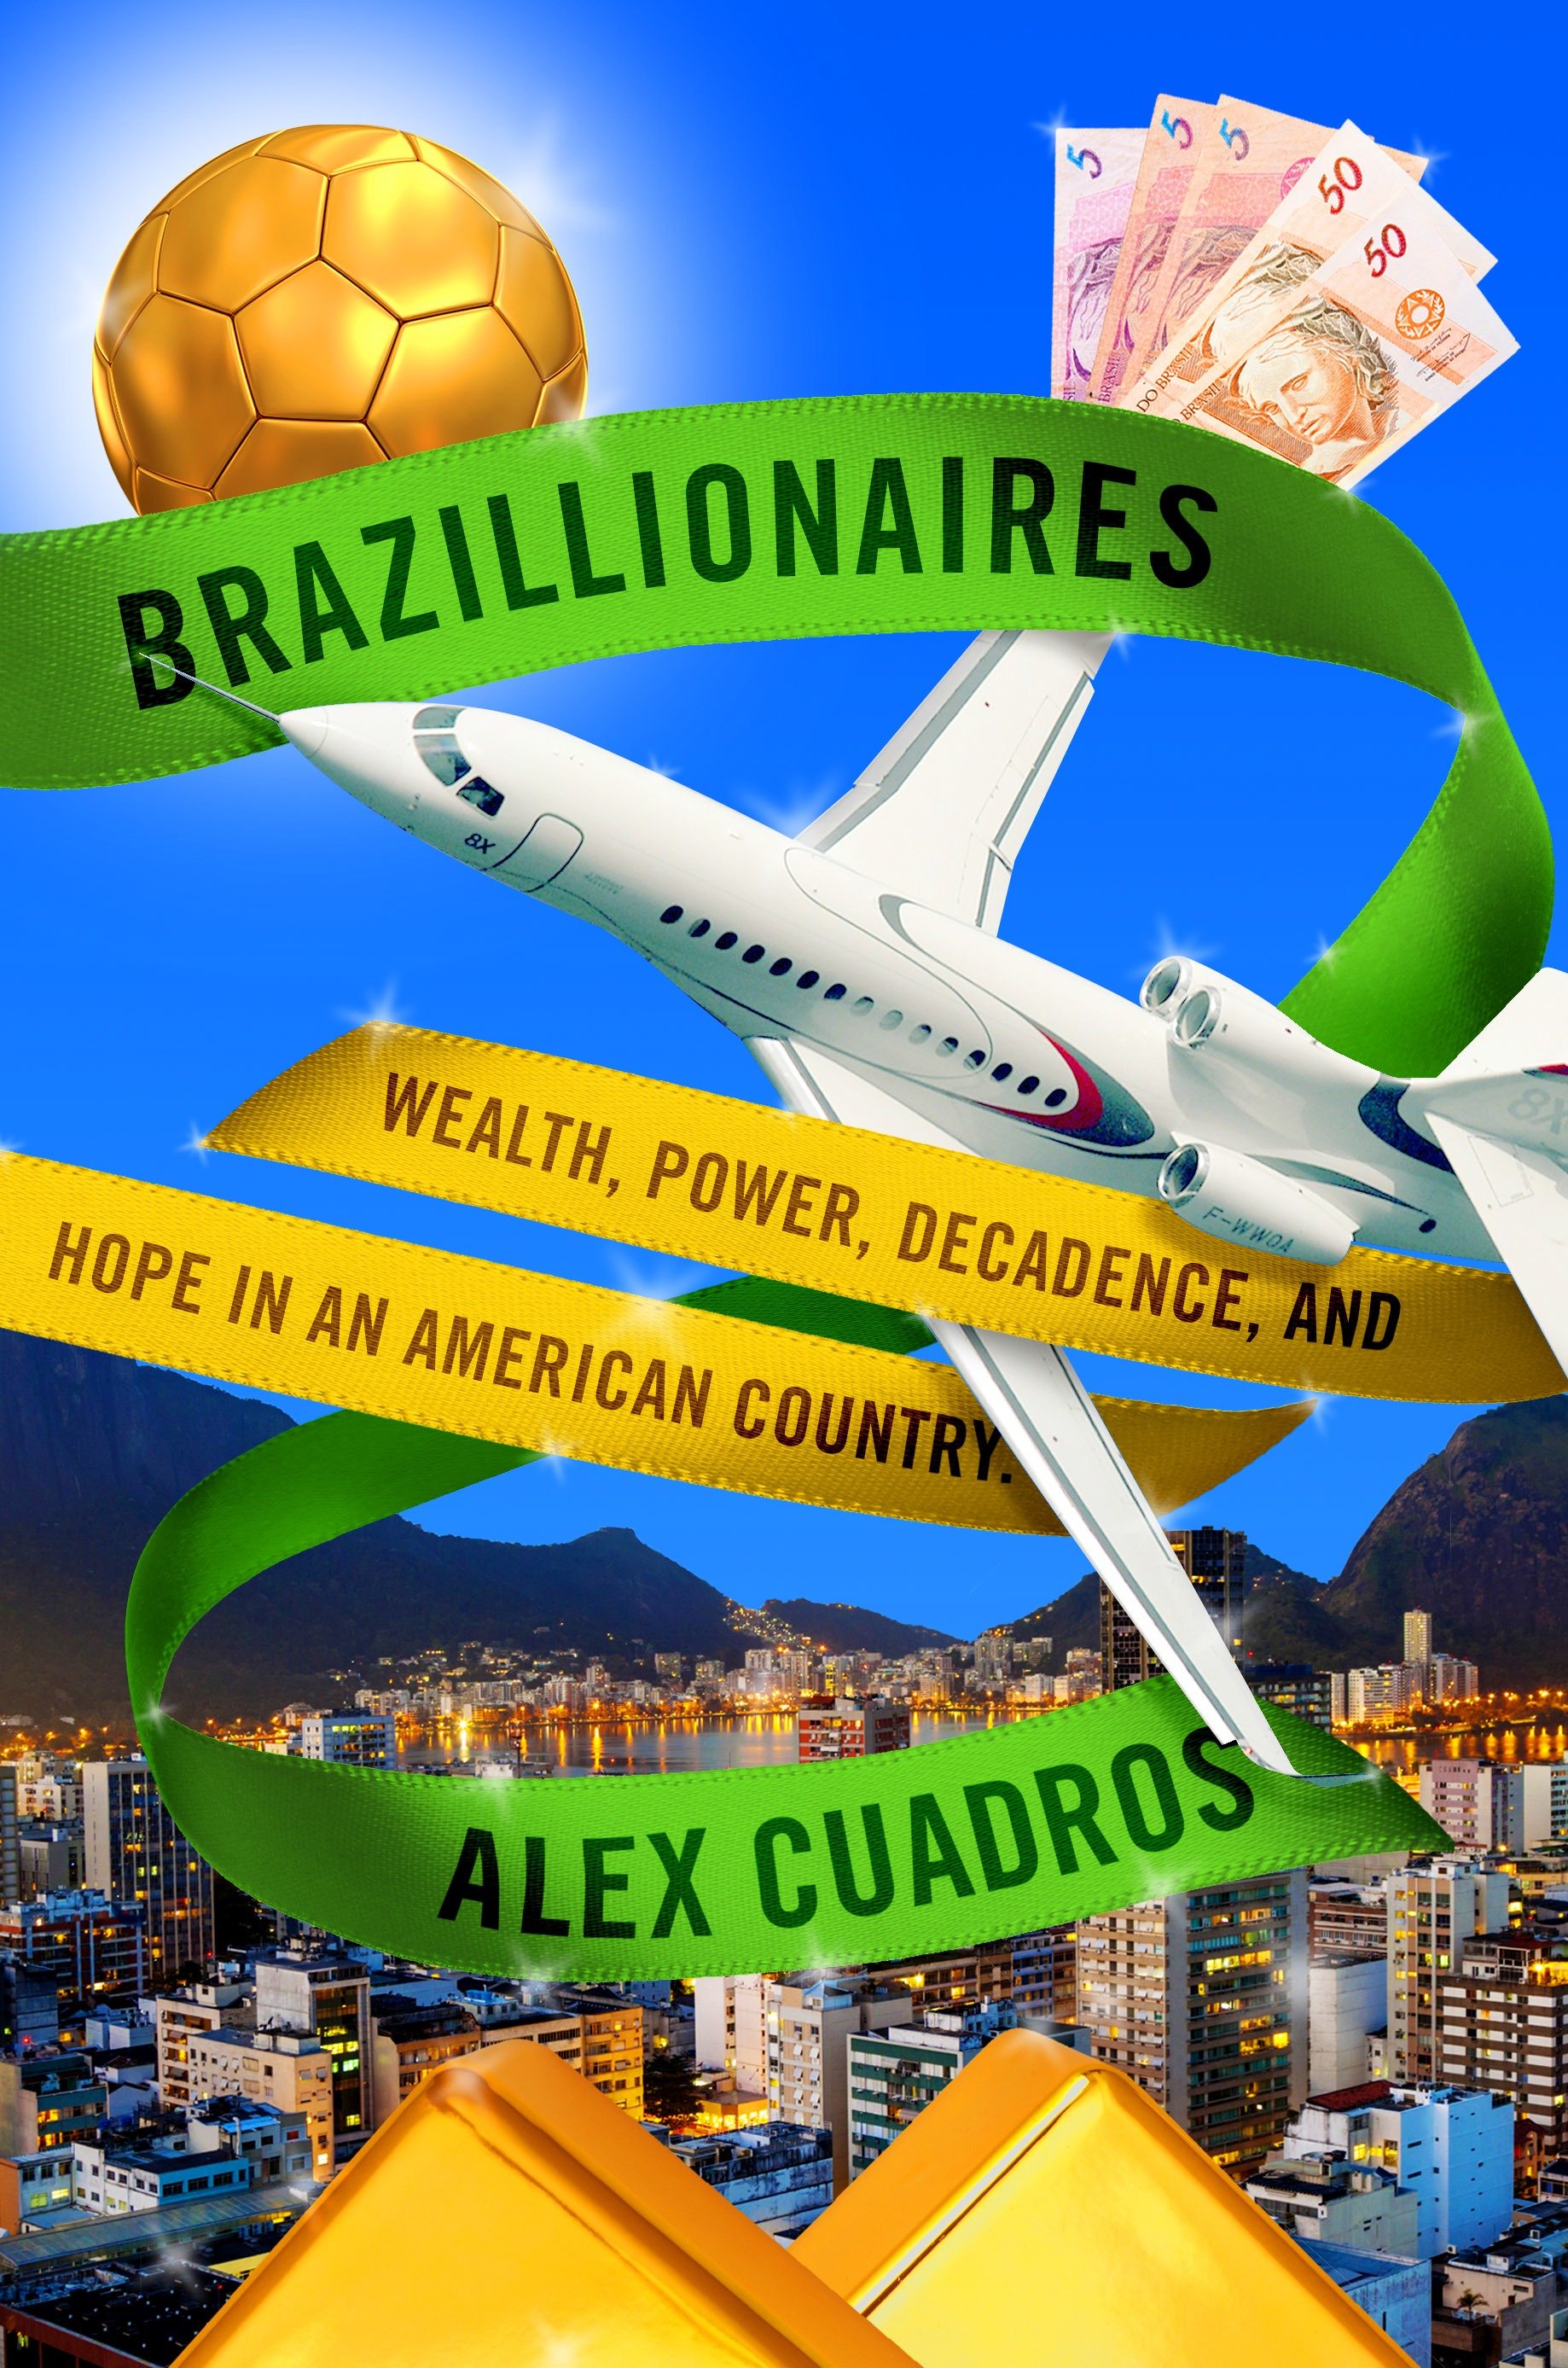 Umschlagbild für Brazillionaires [electronic resource] : Wealth, Power, Decadence, and Hope in an American Country